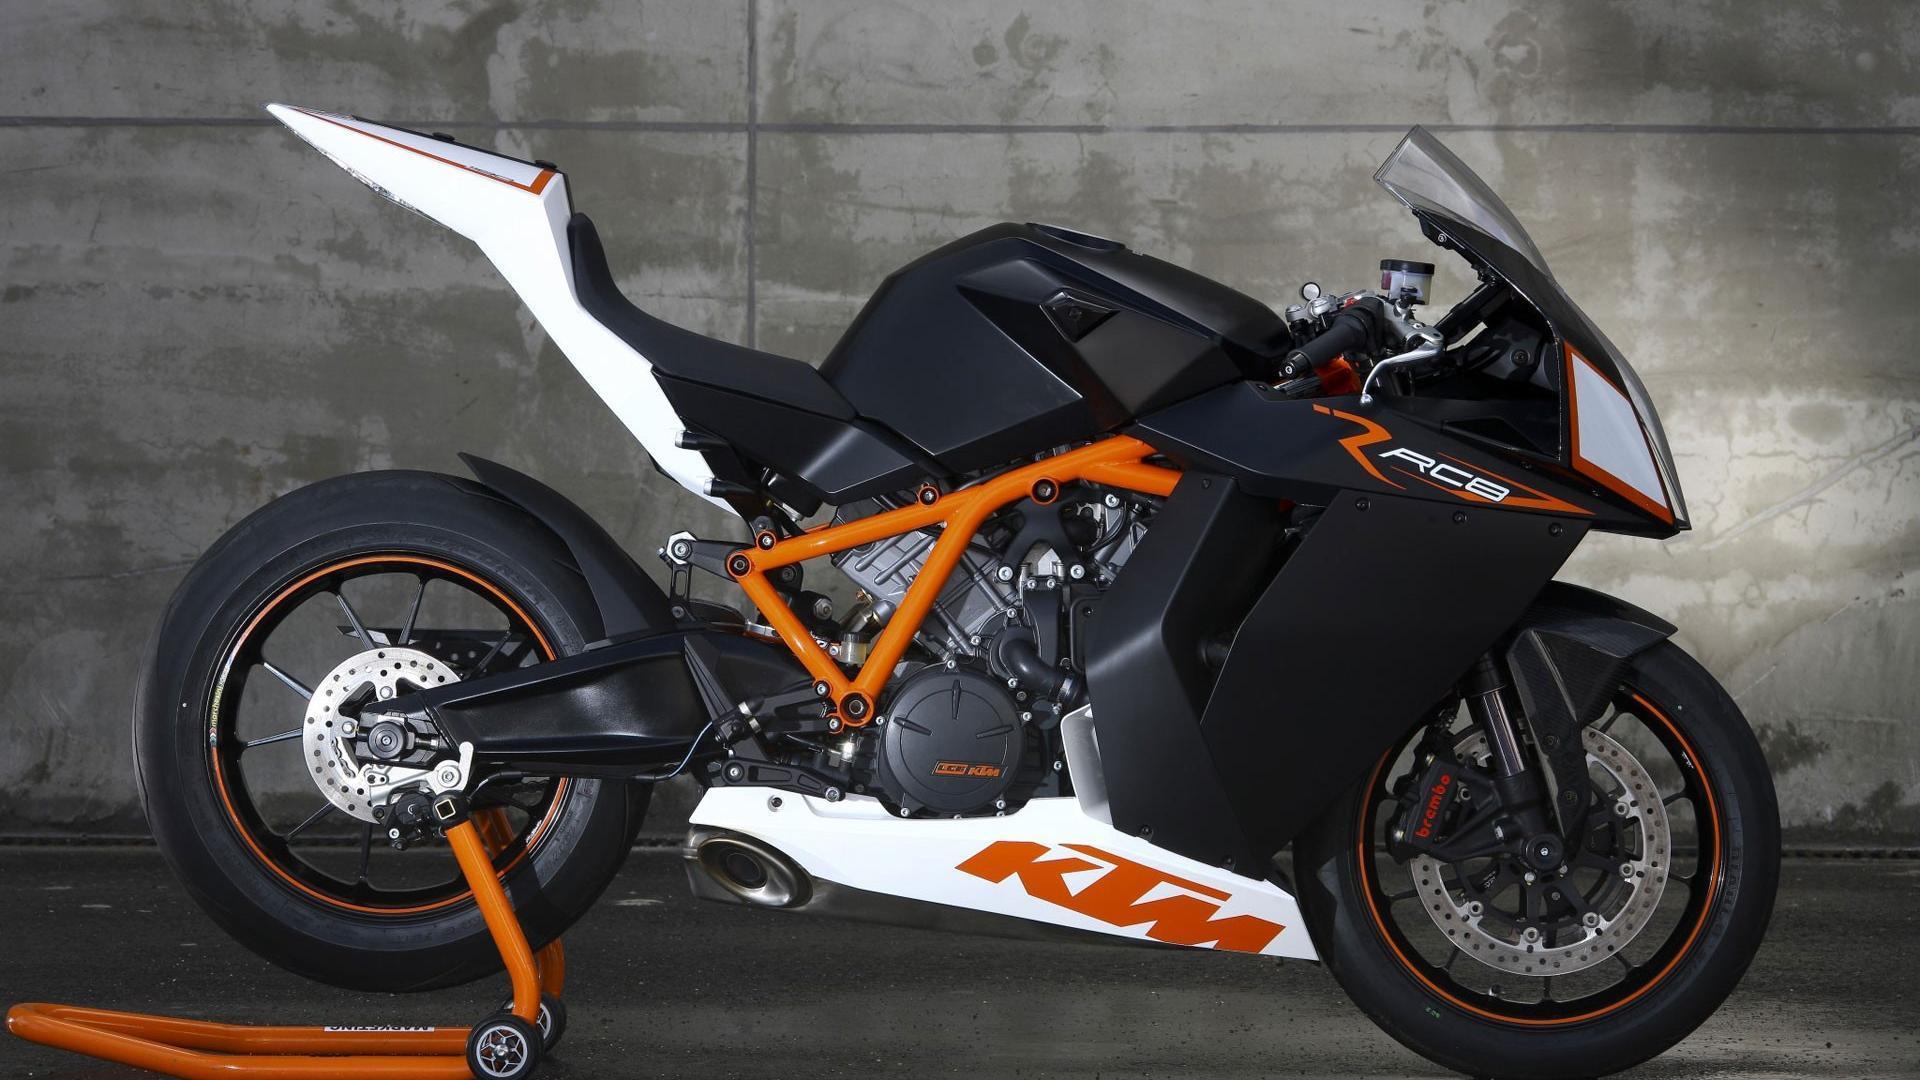 KTM Motorcycle Wallpaper Download 63026 HD Picture. Top